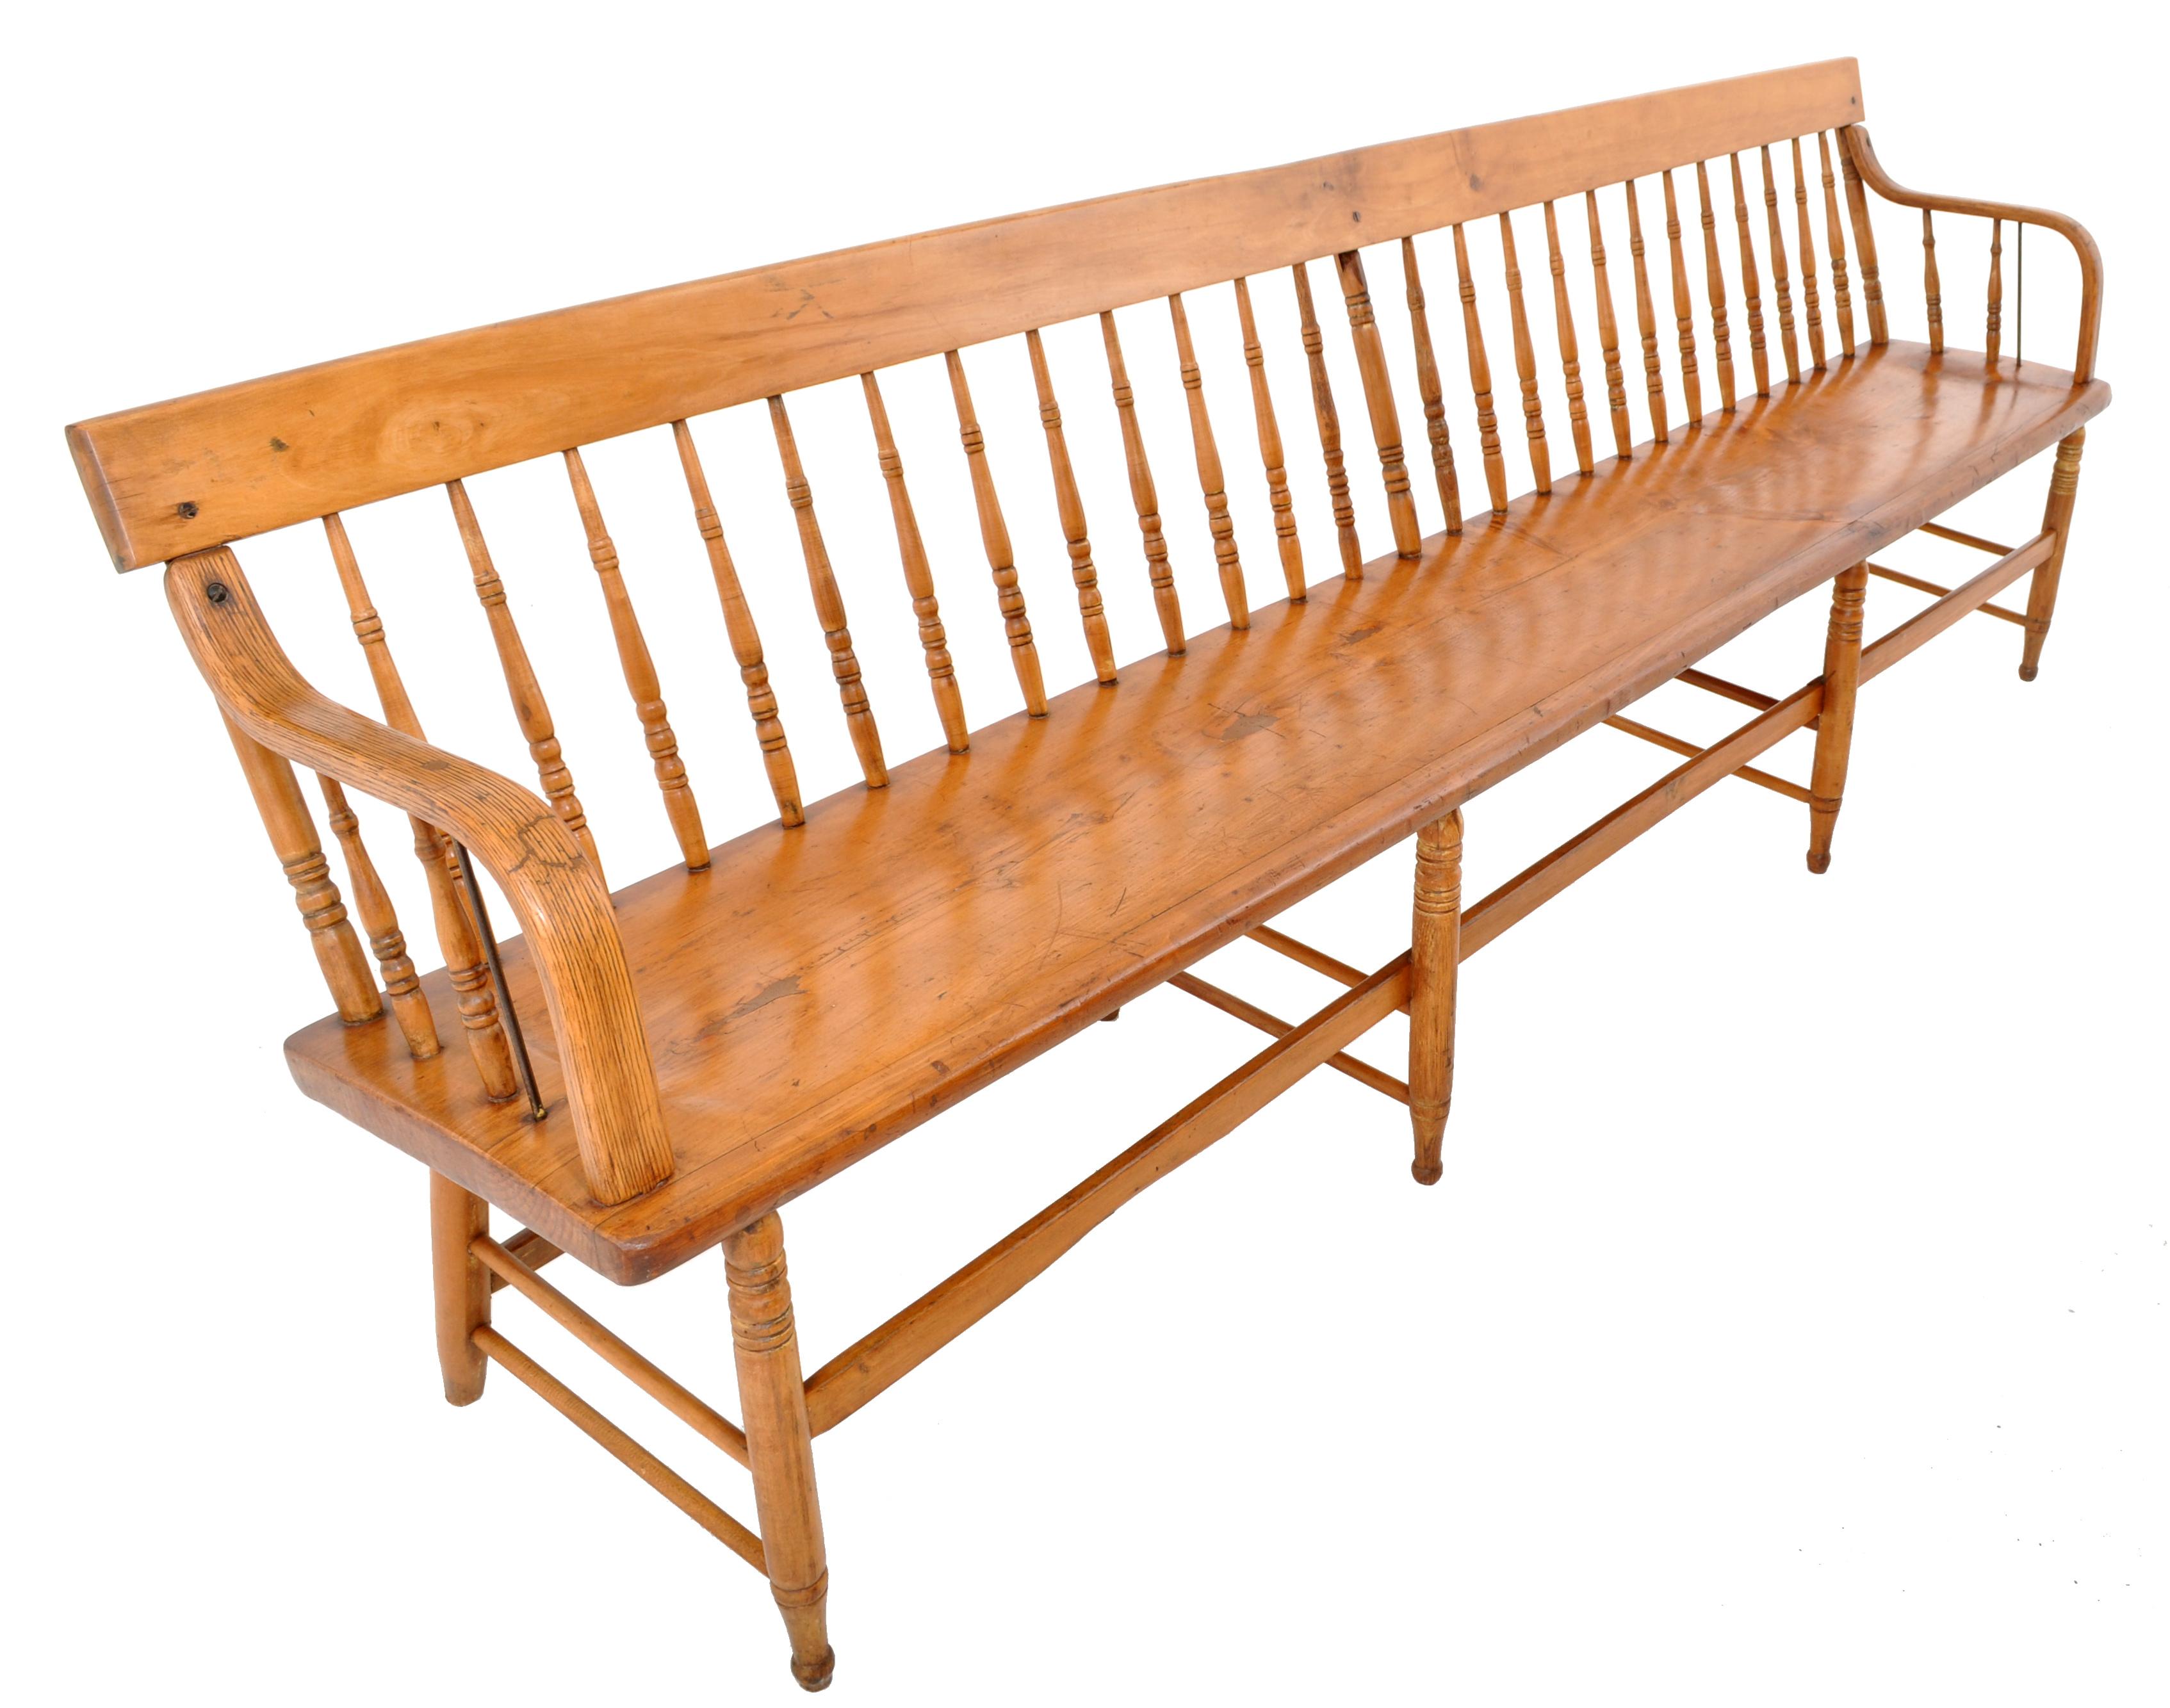 A good long (8ft) antique American pine and maple Colonial style long spindled back deacon's bench, circa 1880. The bench having a single back splat with turned spindles below and having 'bentwood' arm supports at each end. The bench having a long